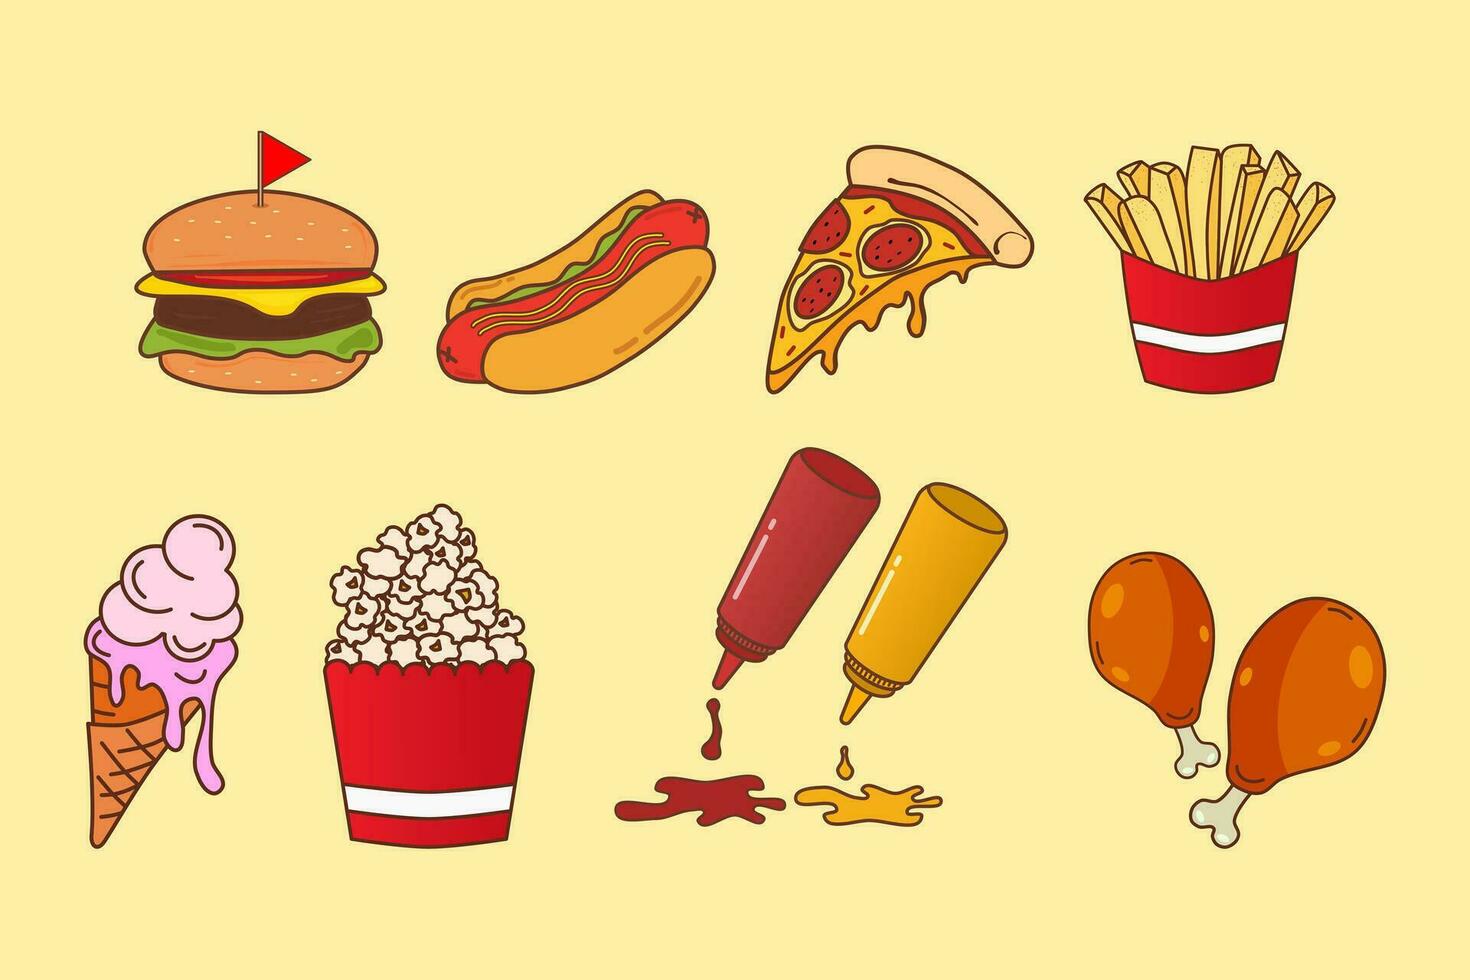 Set vector fast food elements. Pizza slice, burger, french fries,  fried chicken, hot dog, ice cream, popcorn, ketchup and tomato sauce bottle.